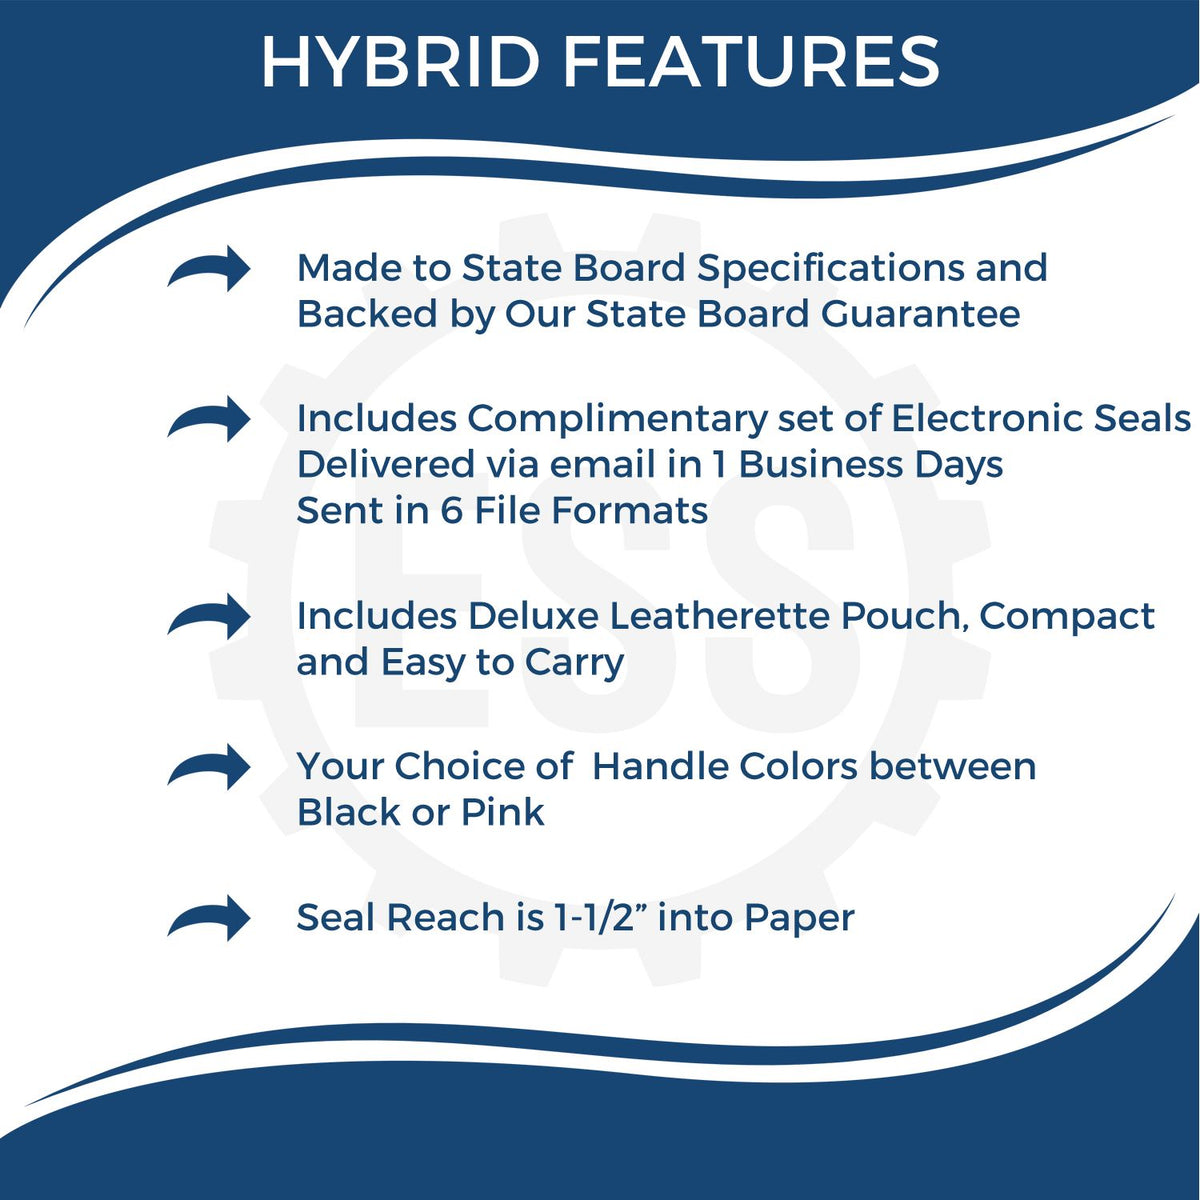 A picture of an infographic highlighting the selling points for the Hybrid Indiana Landscape Architect Seal